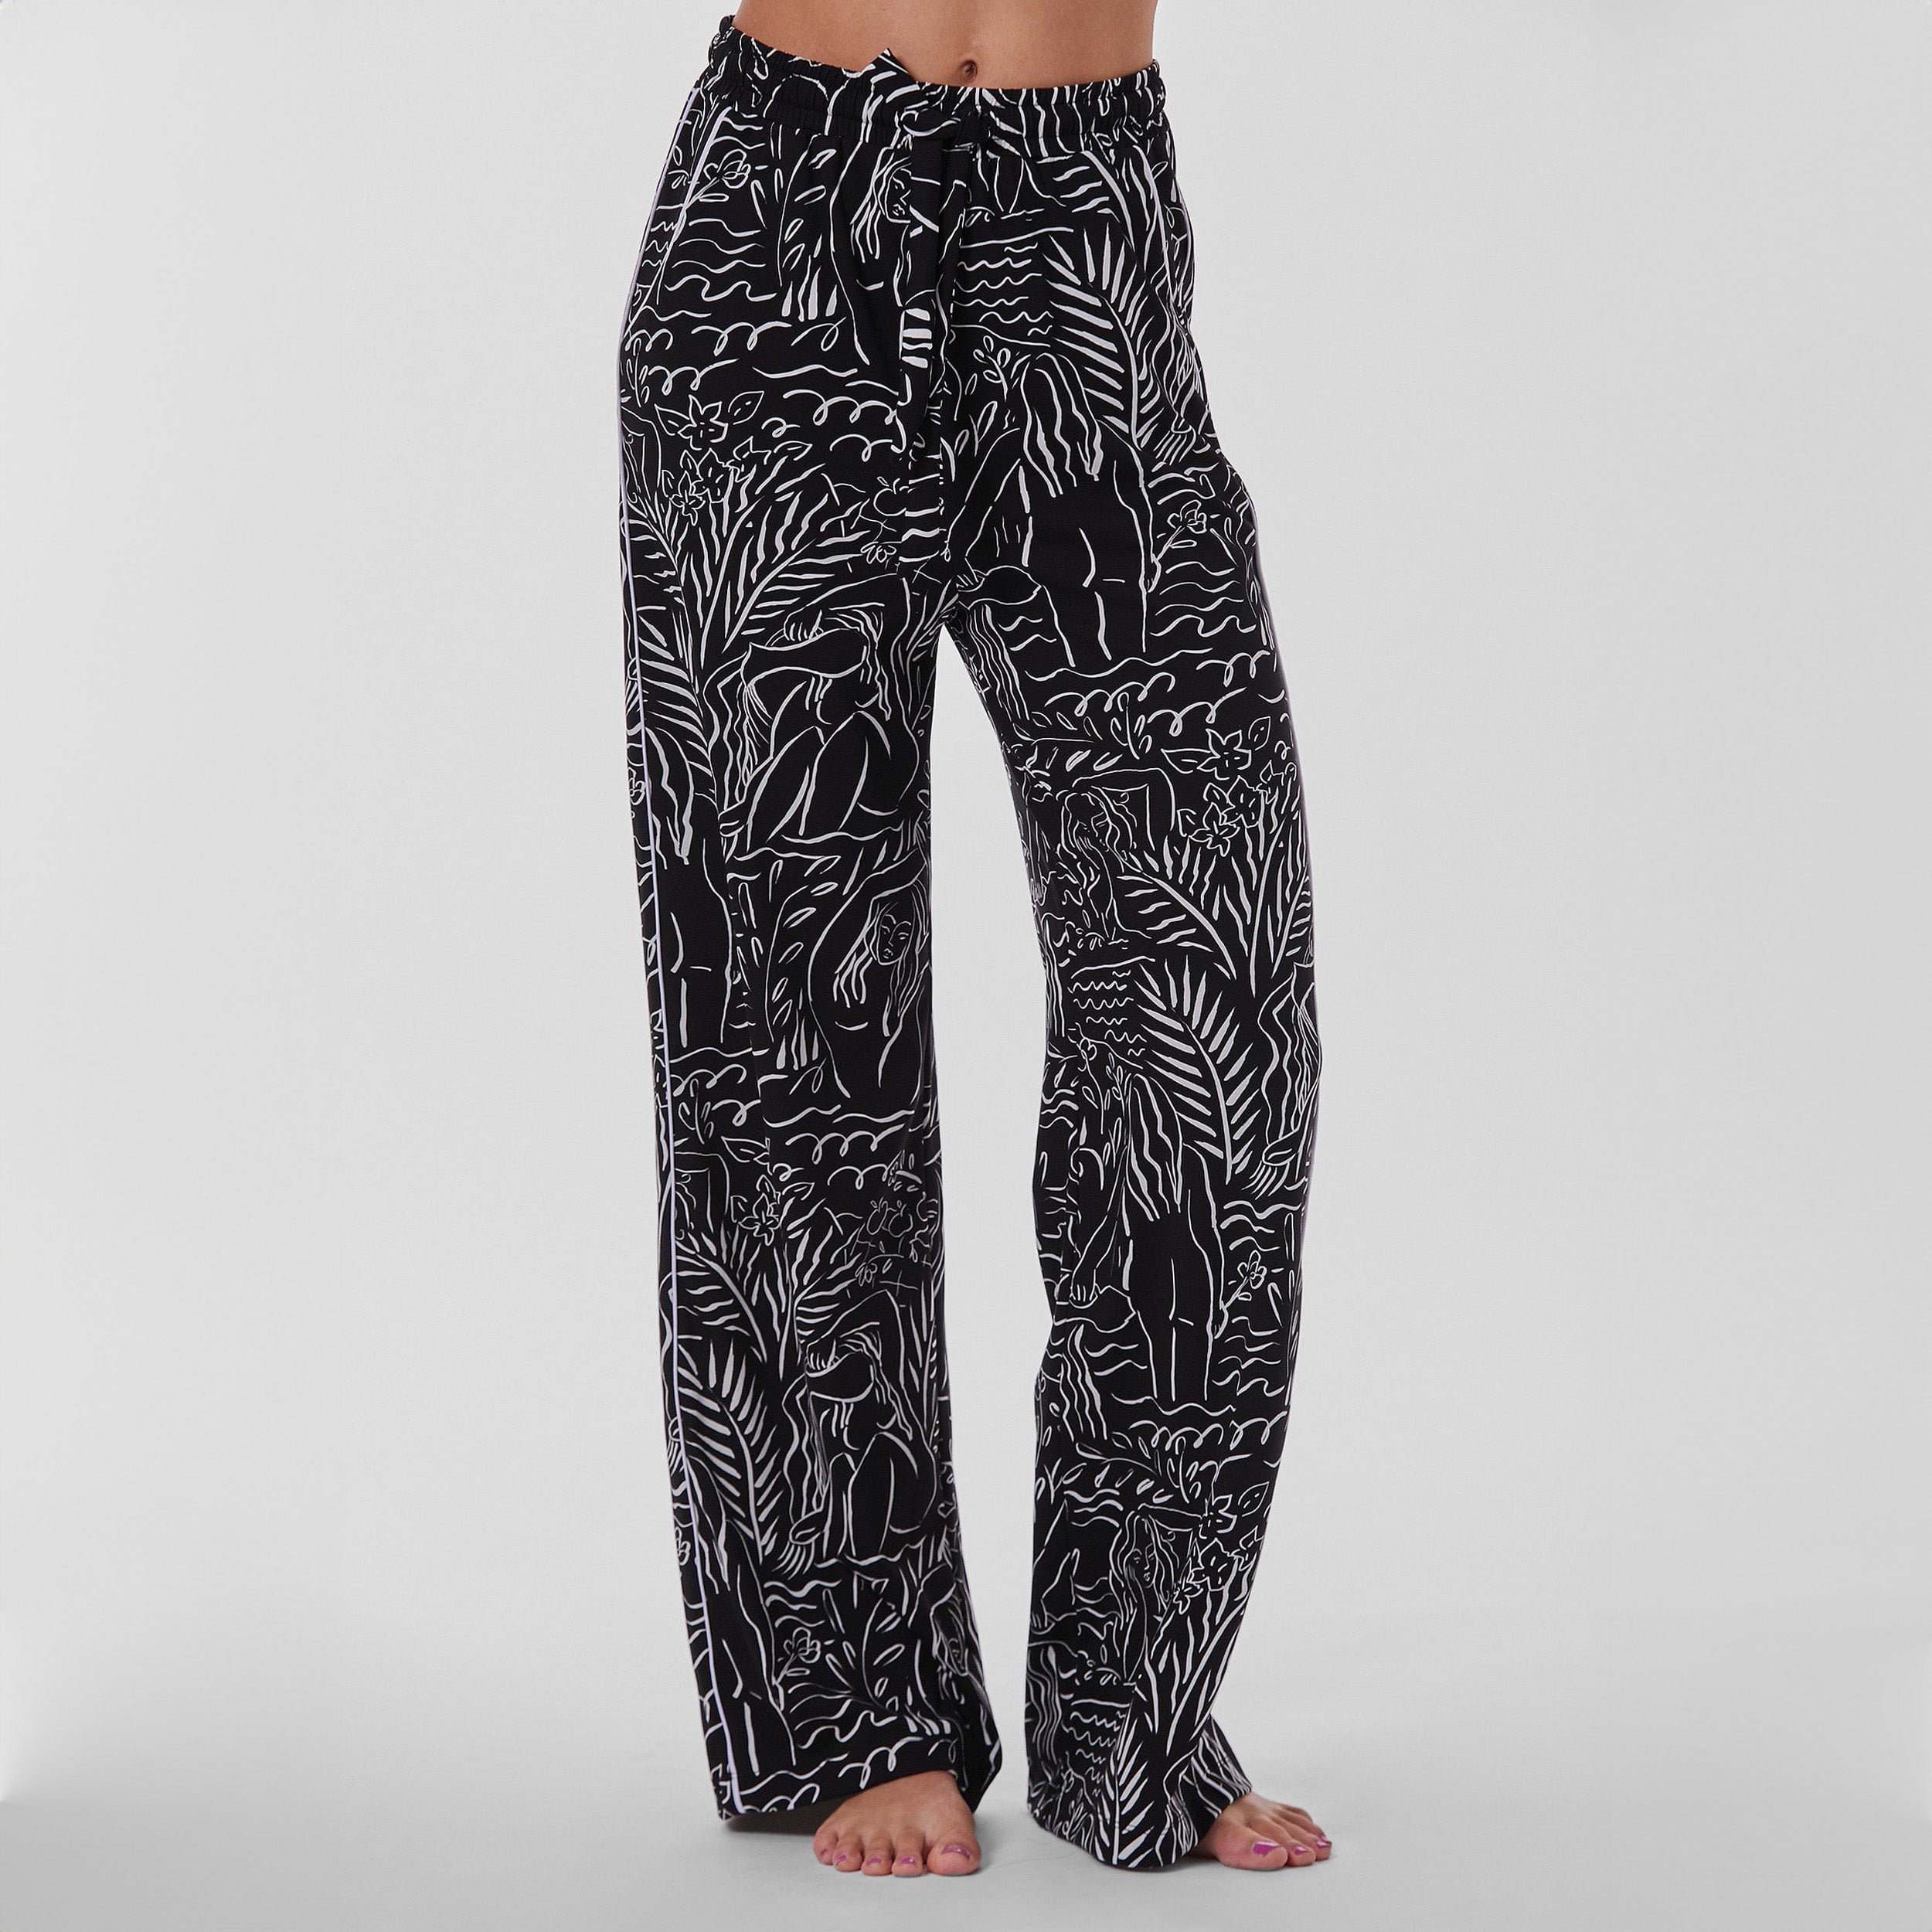 Front view of woman wearing breathable, relaxed and buttery smooth pajama pant featuring high-waist cut, side pockets, front tie and stunning Venus print.